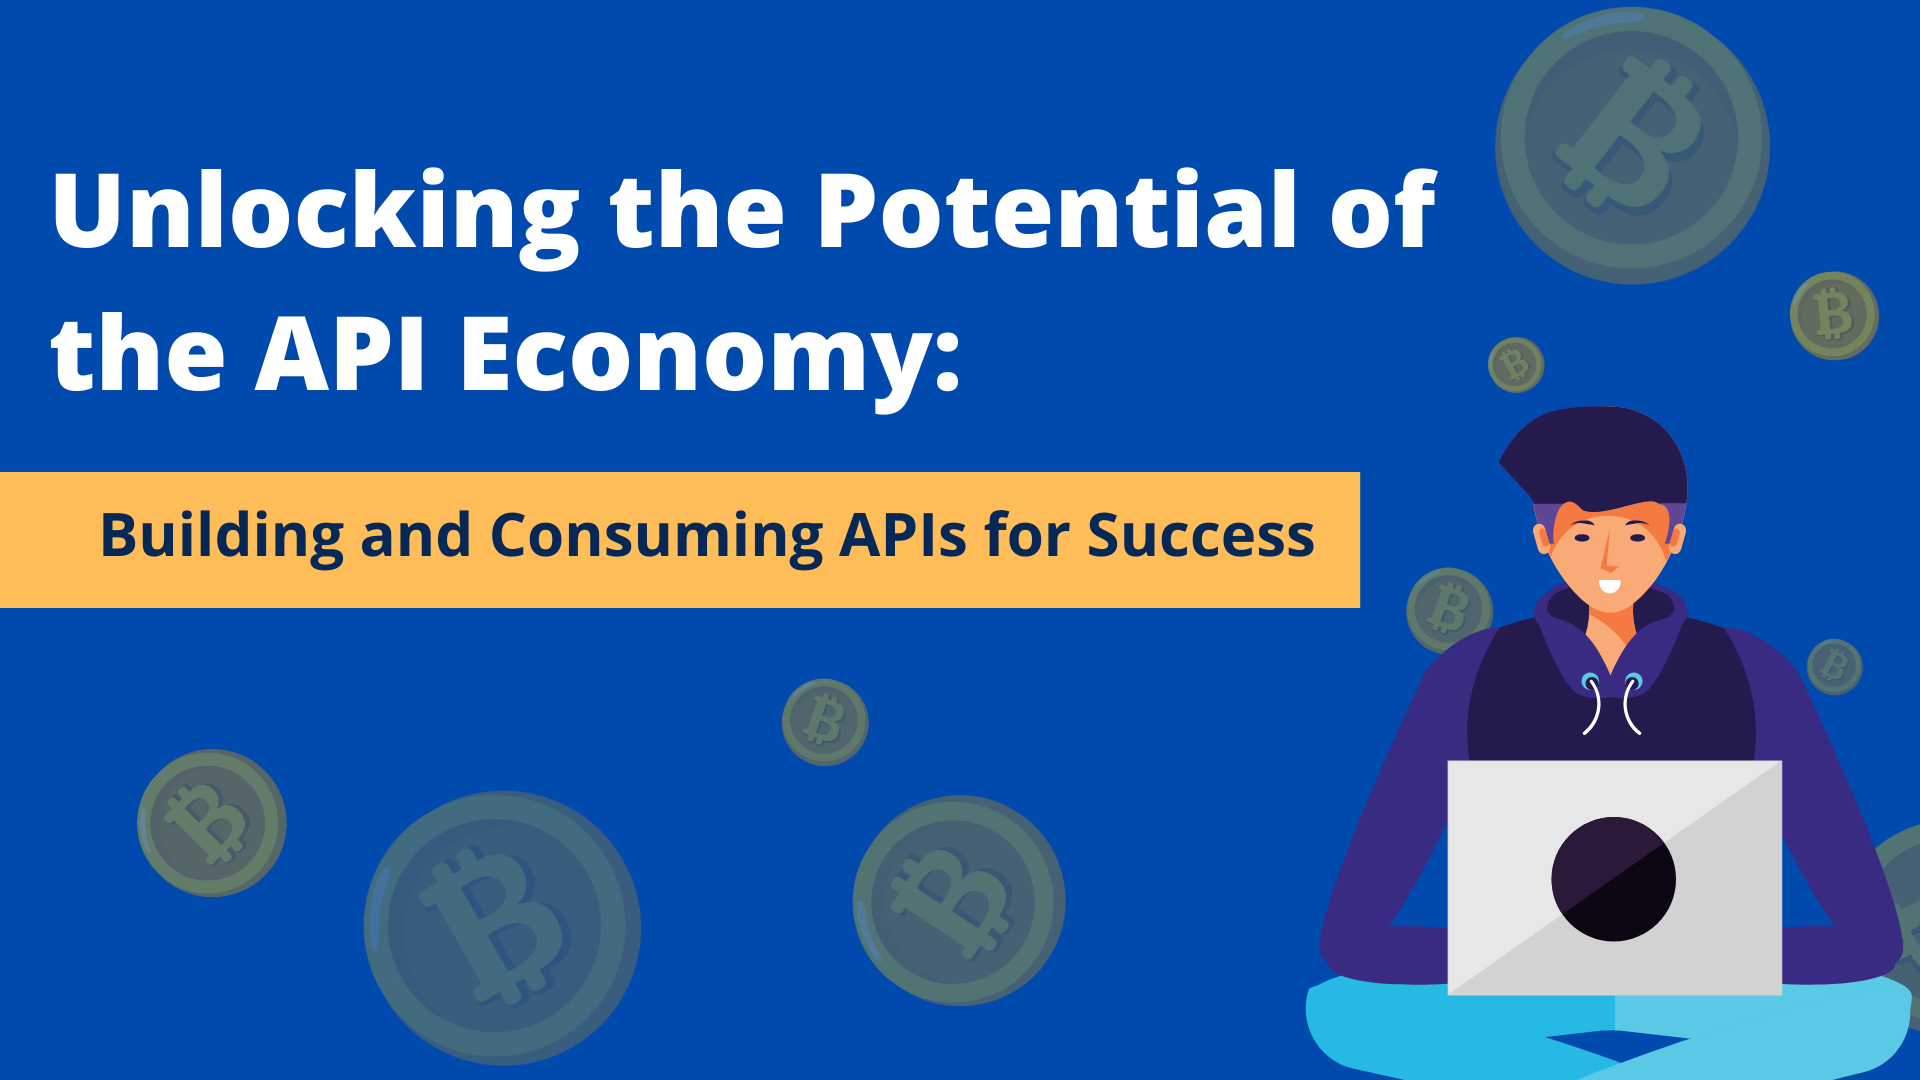 Unlocking the Potential of the API Economy: Building and Consuming APIs for Success